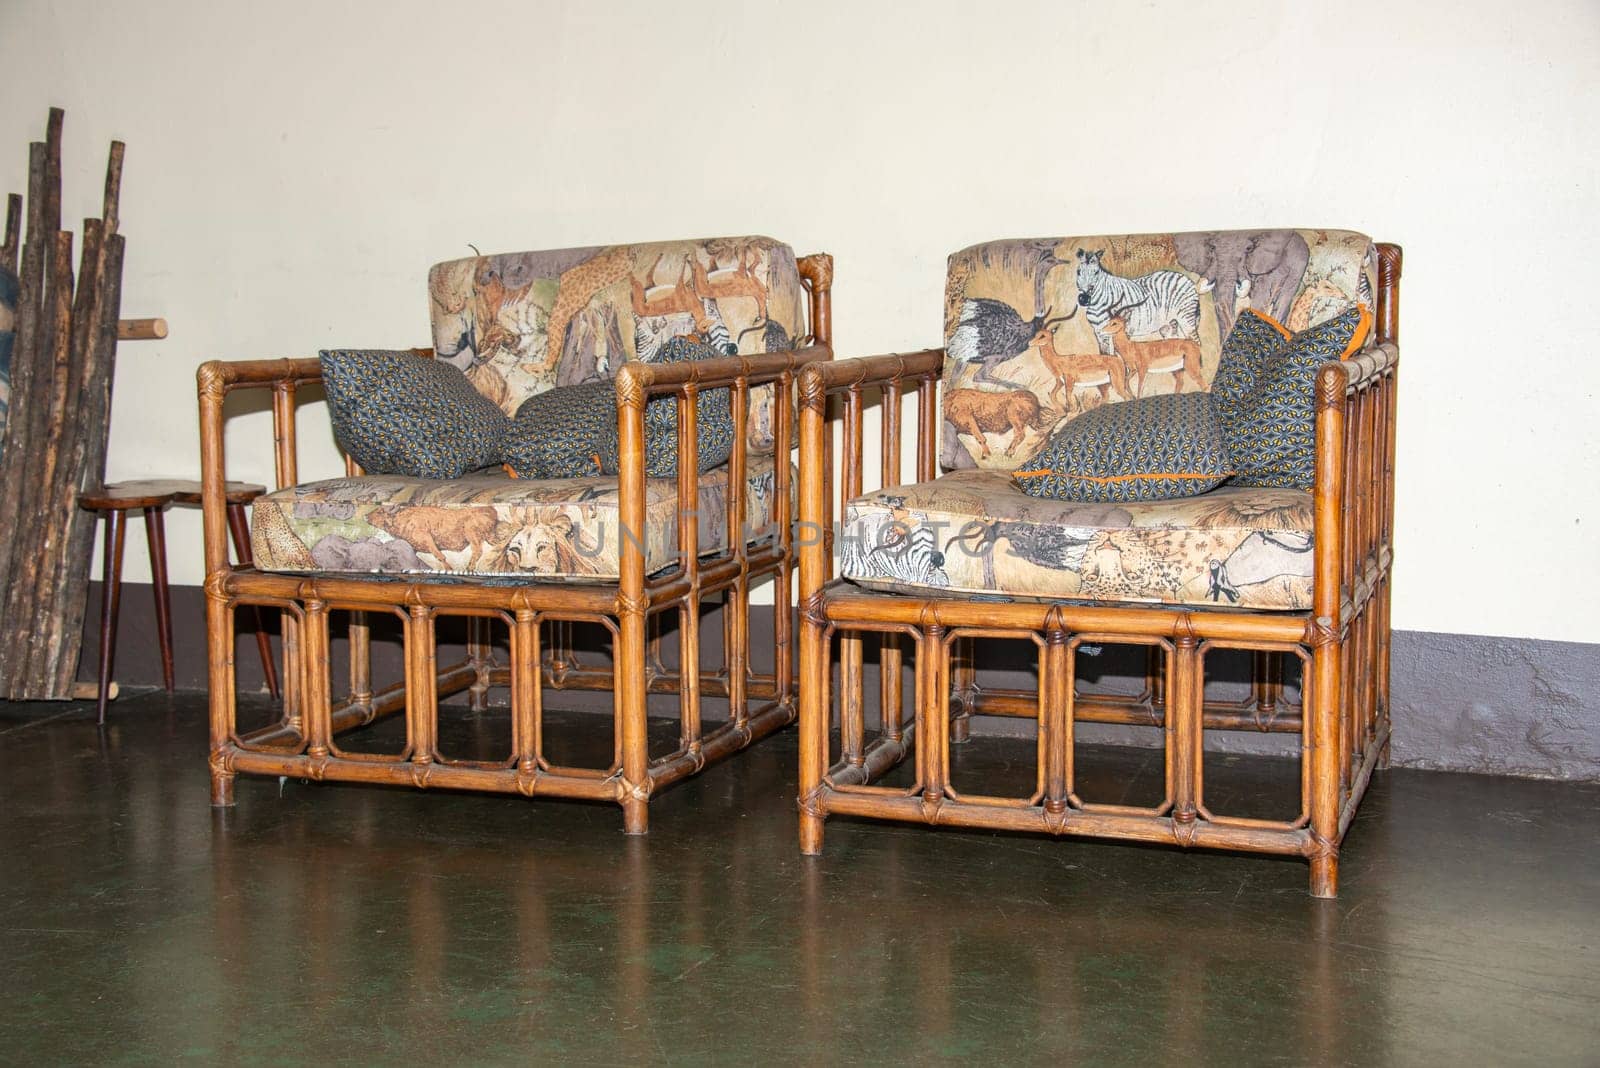 two bamboo chairs with animal drawings on the cushions by compuinfoto